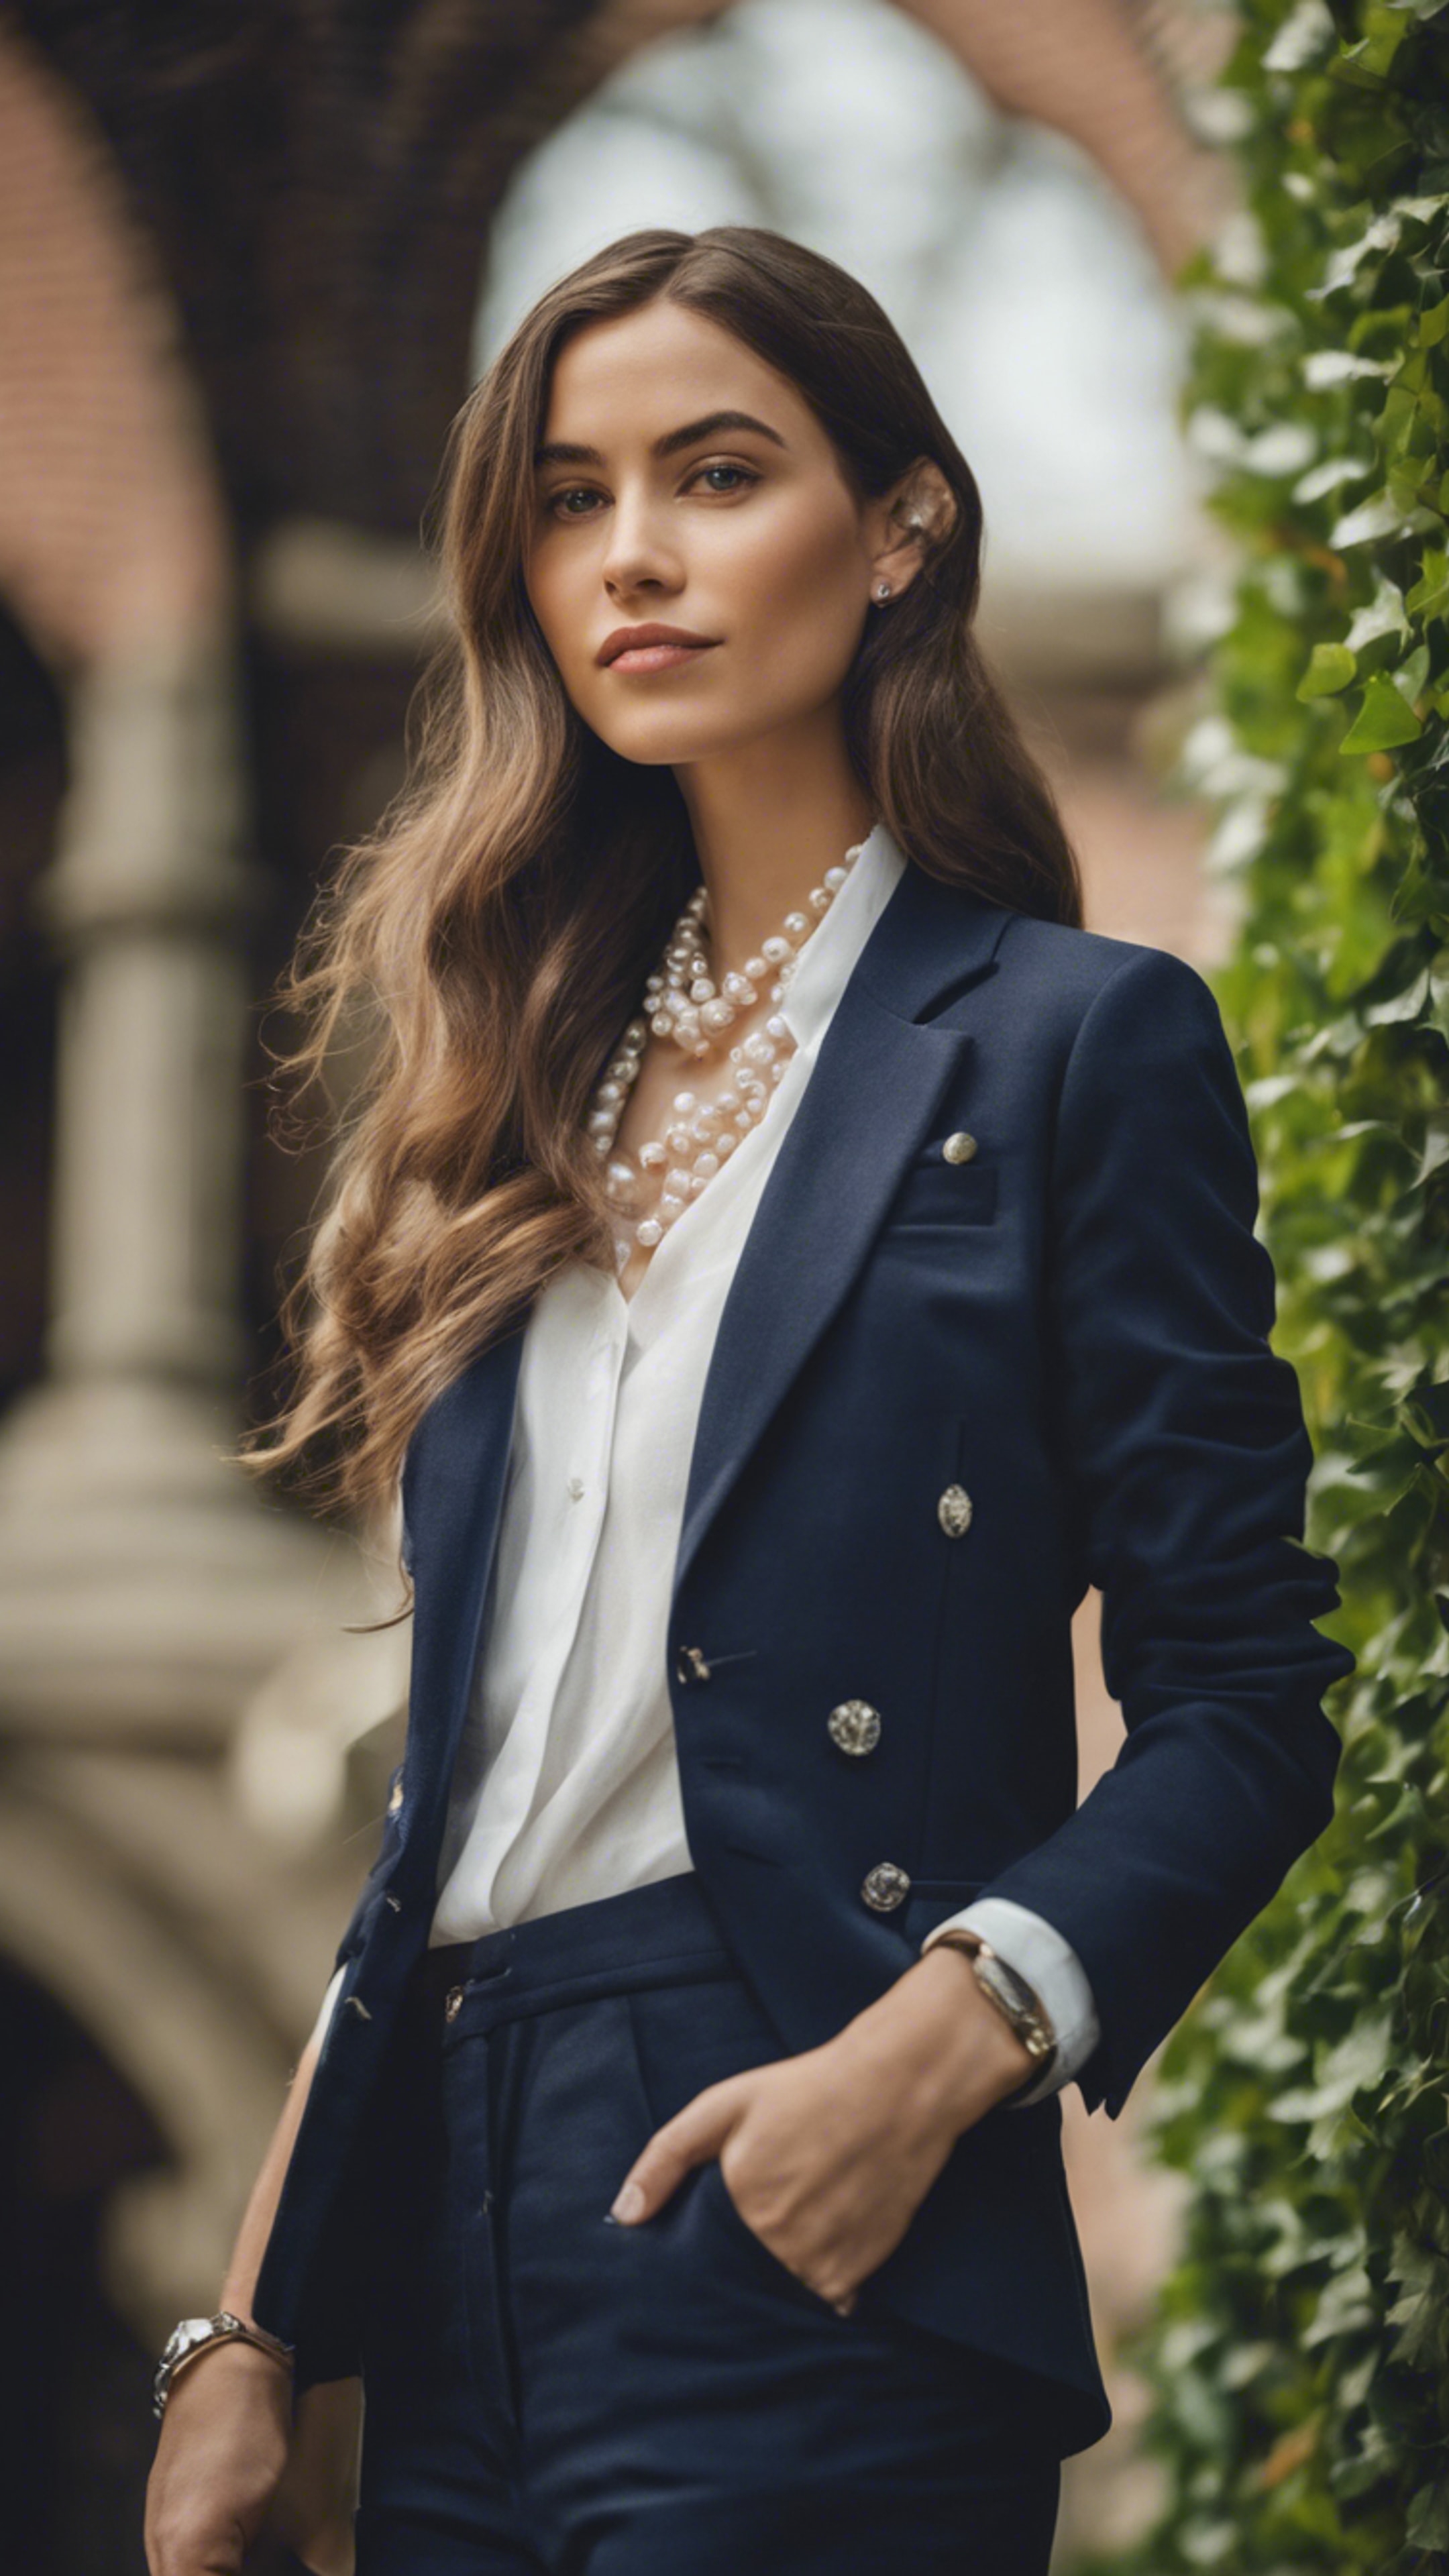 A portrait of a preppy woman in a navy blue blazer, pearl necklace, and a white linen shirt, posing in an Ivy League campus. Обои[1775f808339c45cb81cf]